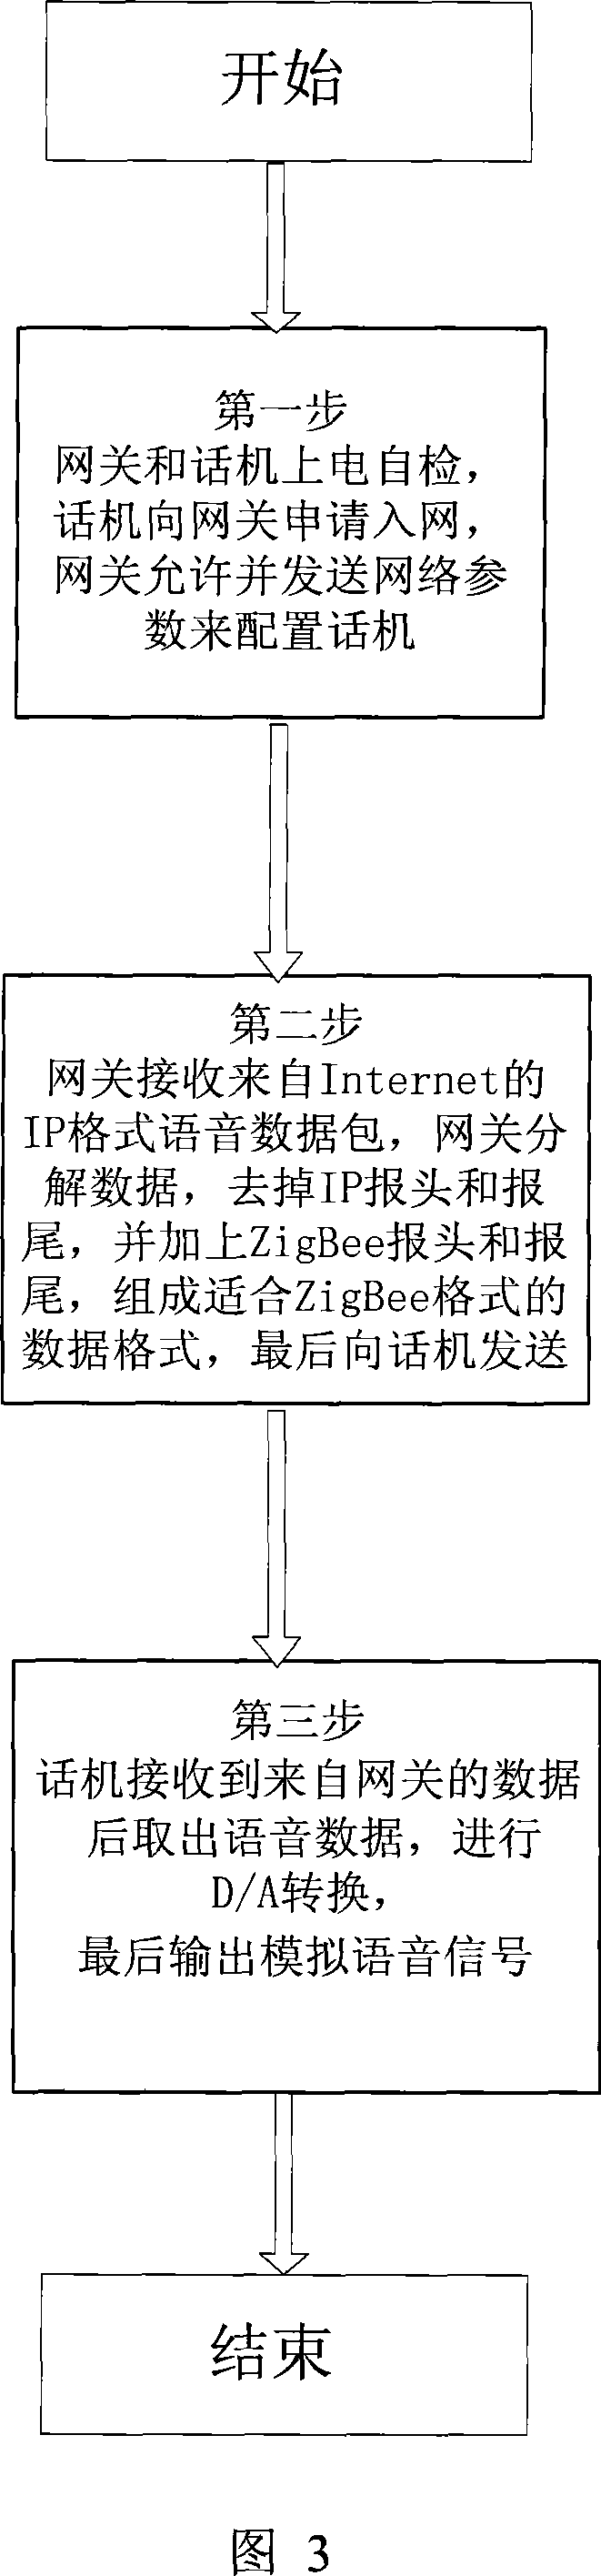 Method and system for implementing wireless IP telephone using ZigBee